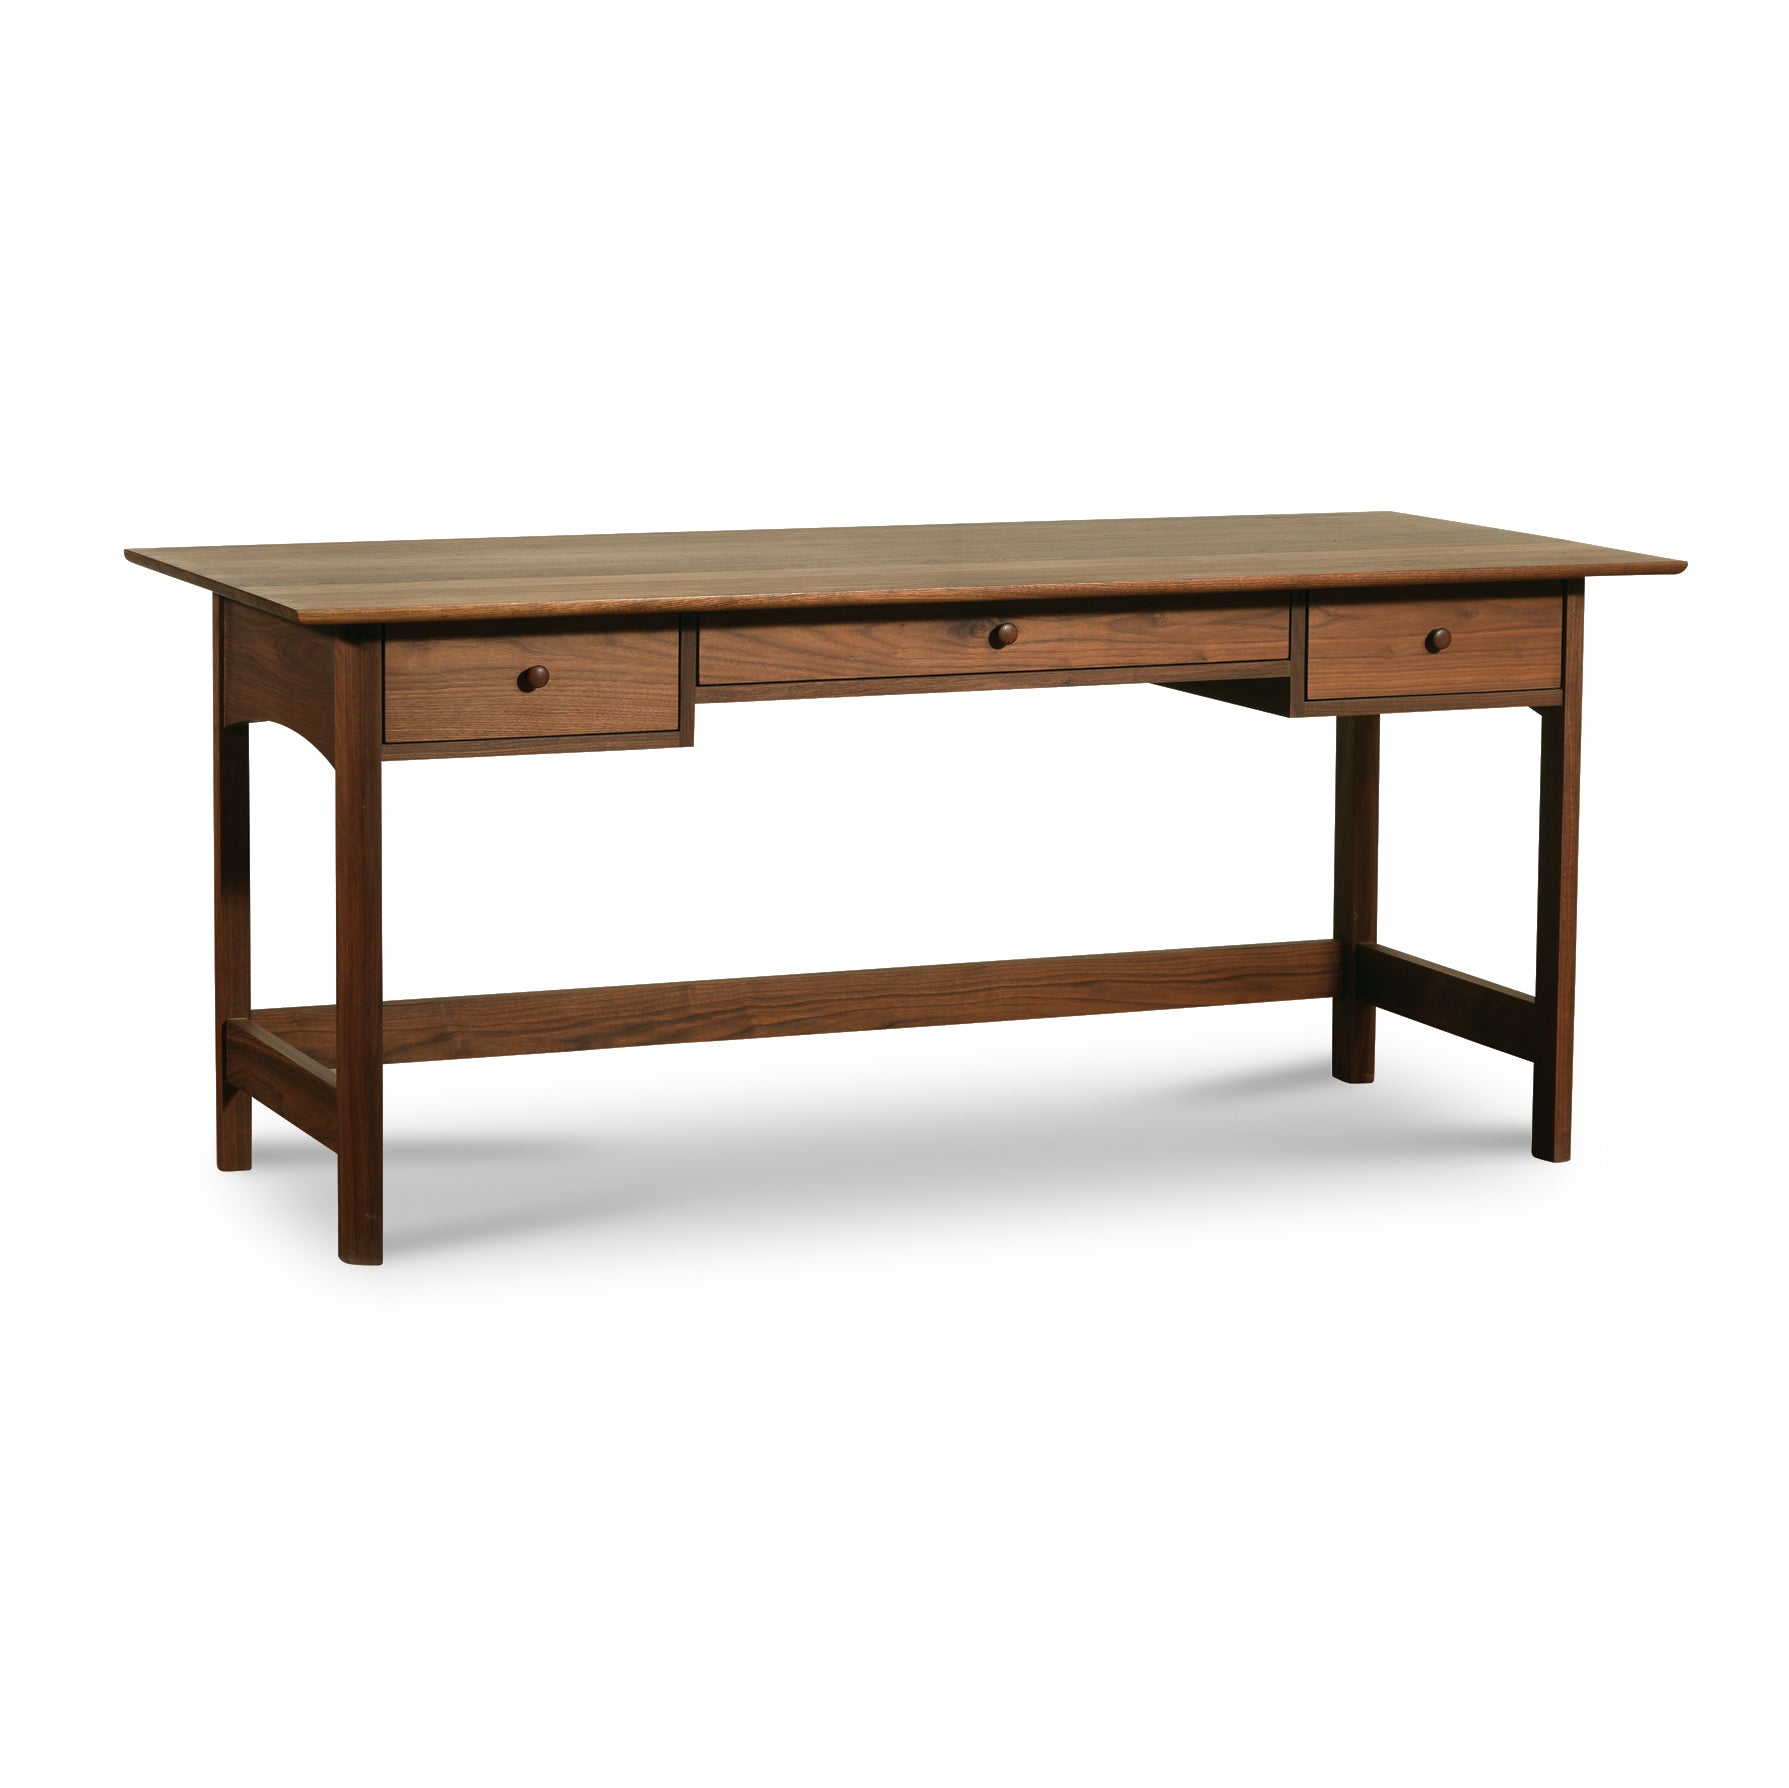 A Vermont Furniture Designs Heartwood Shaker Campaign Desk with two drawers and a rectangular top, isolated on a white background.